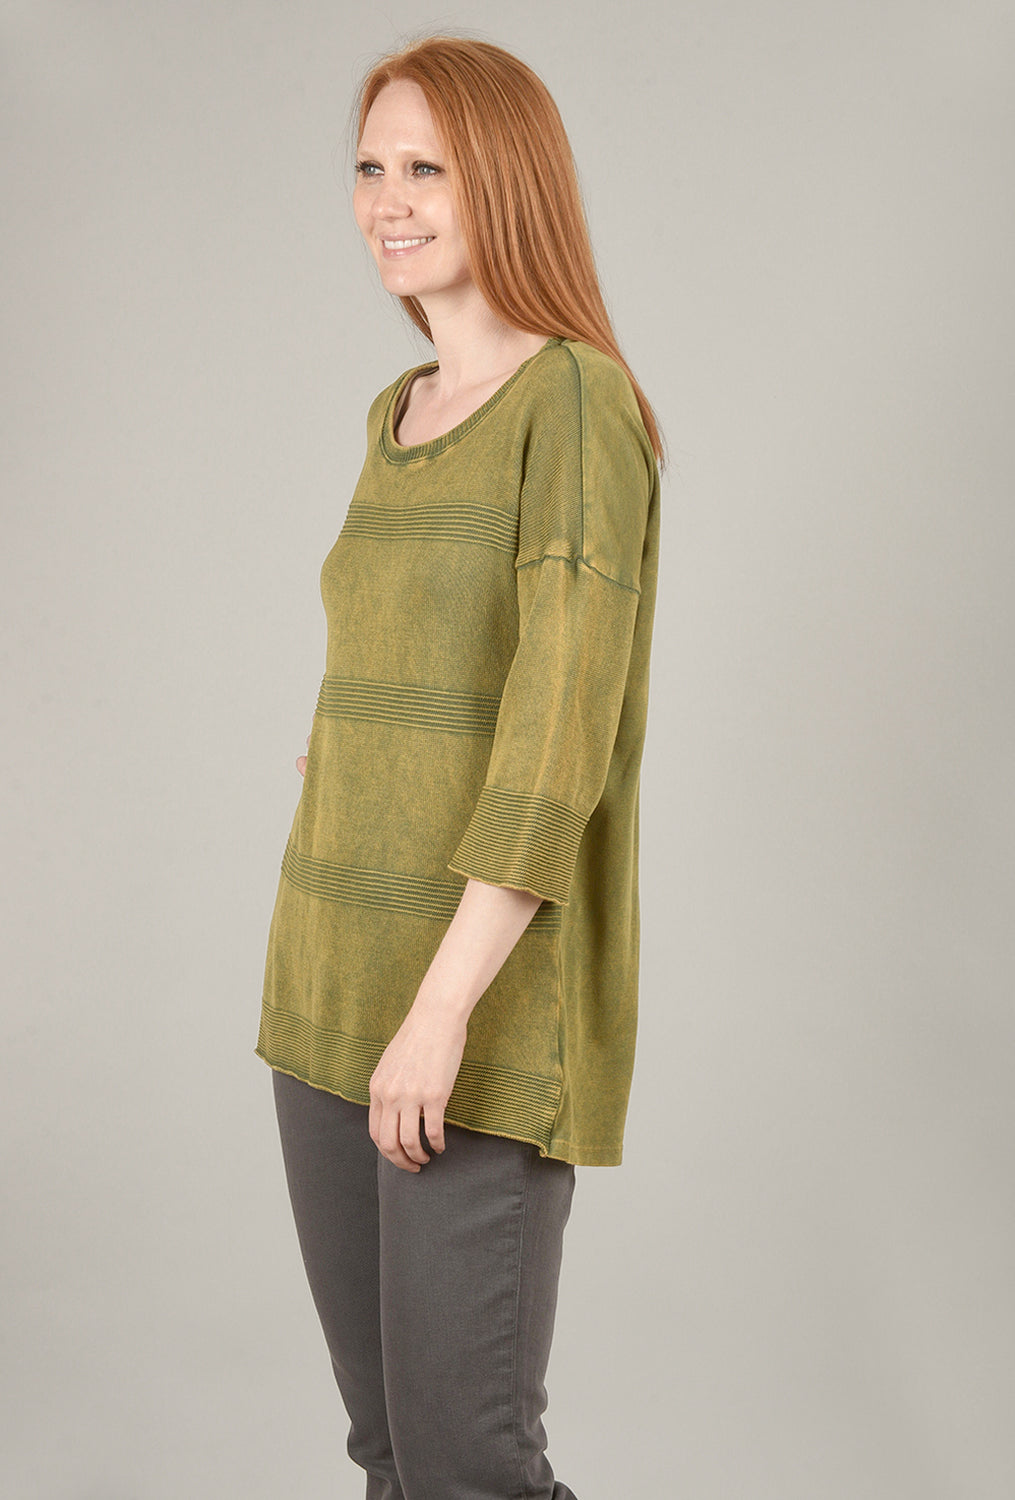 M. Rena 3/4-Sleeve Mineral Wash Sweater, Green Olive 